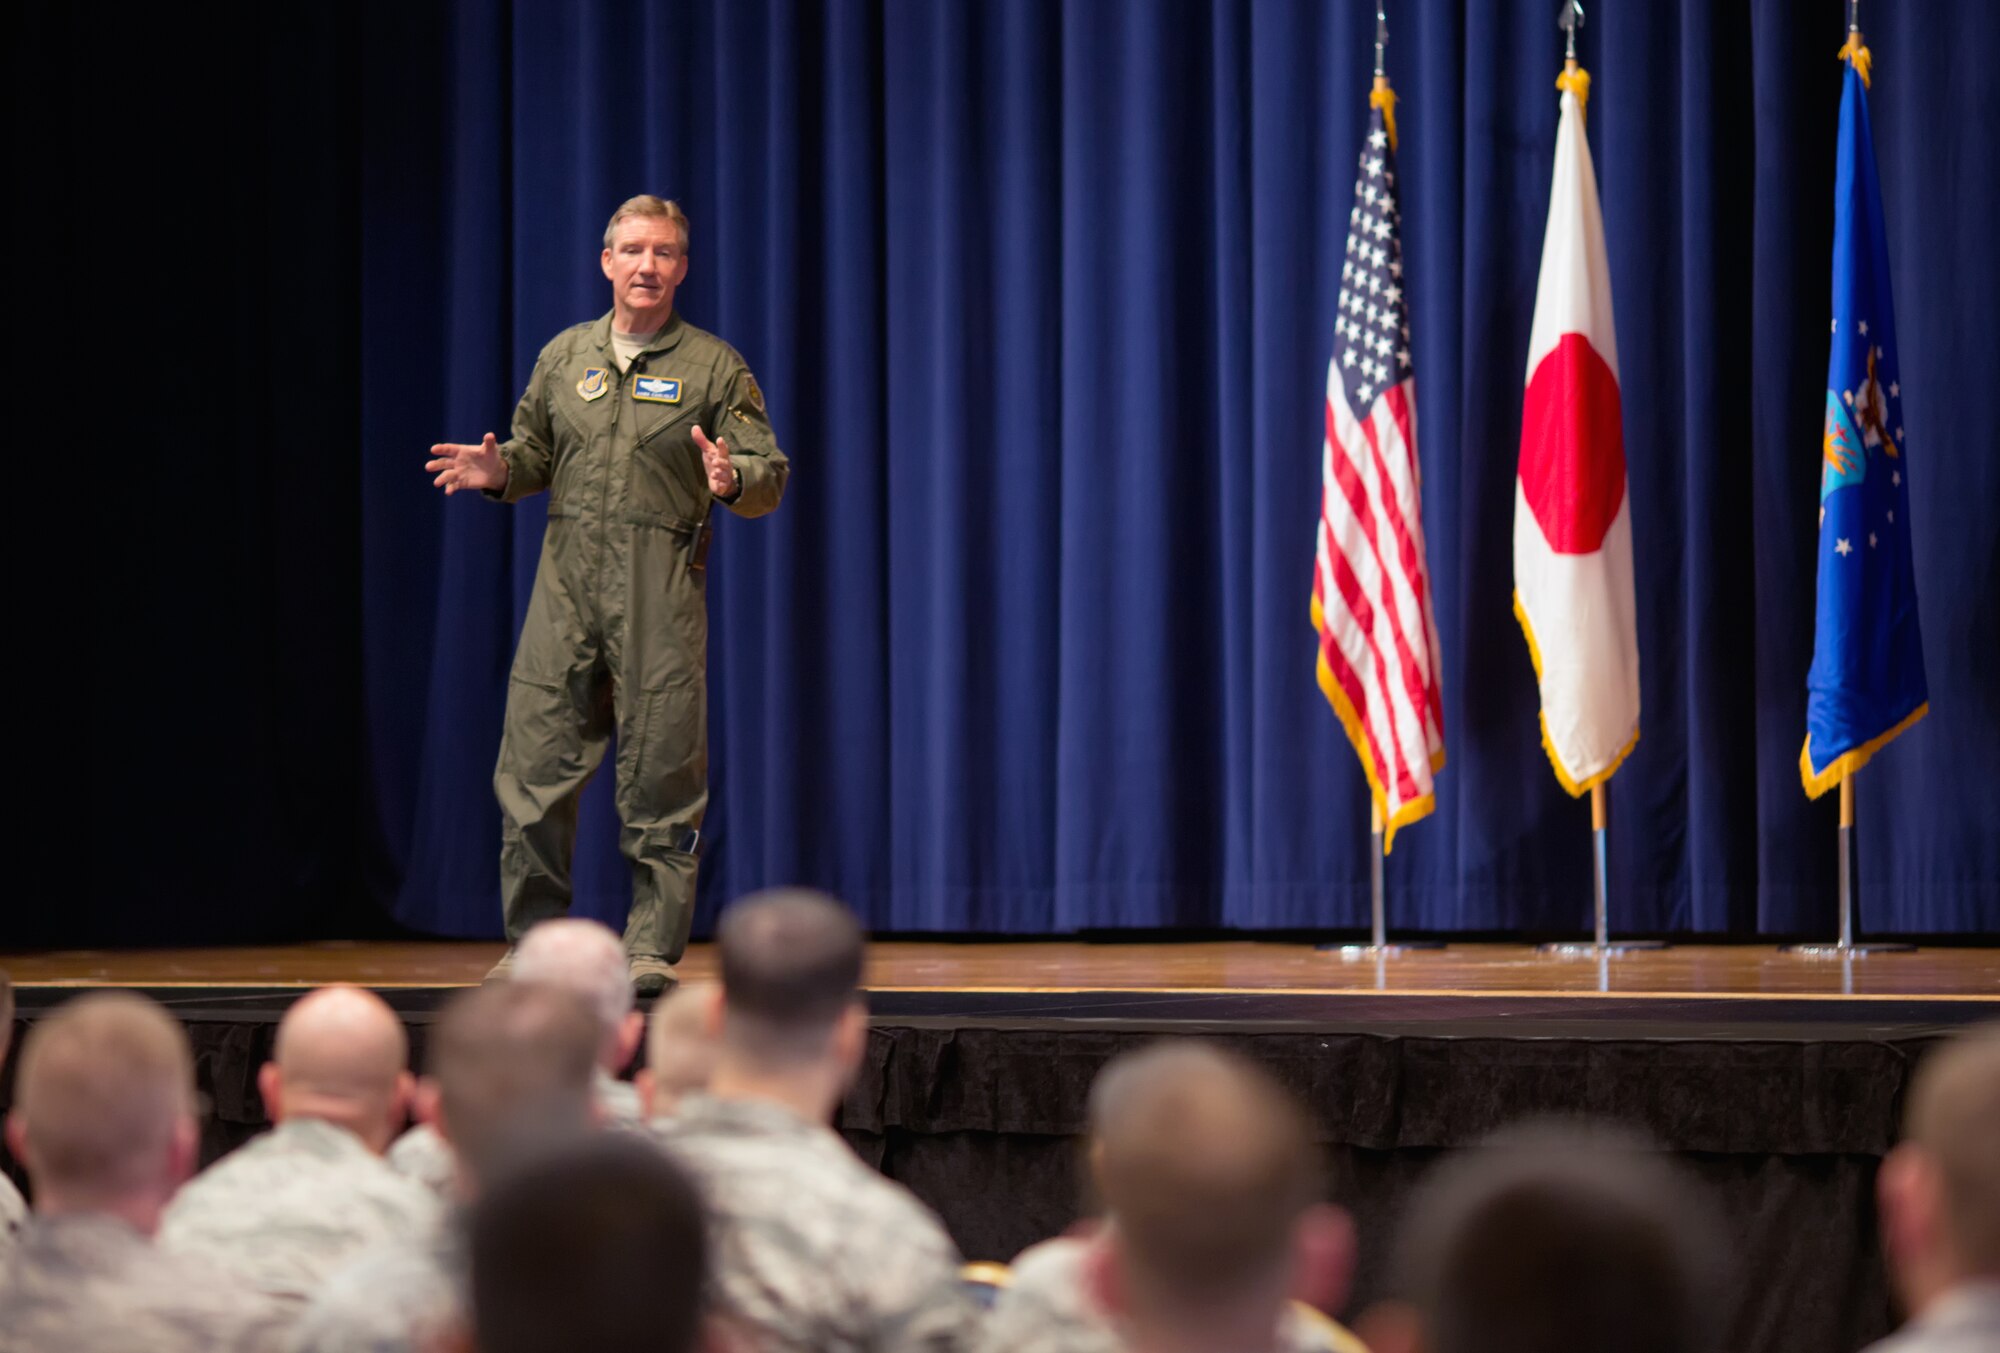 YOKOTA AIR BASE, Japan -- Gen. Herbert J. "Hawk" Carlisle, Pacific Air Forces commander, addresses Yokota Airmen during an all call, Oct. 24, 2012, at Yokota Air Base, Japan. During his speech, Carlisle emphasized the following to Airmen: "Our job in life is to fight and win our nation's wars." (U.S. Air Force photo by Osakabe Yasuo)